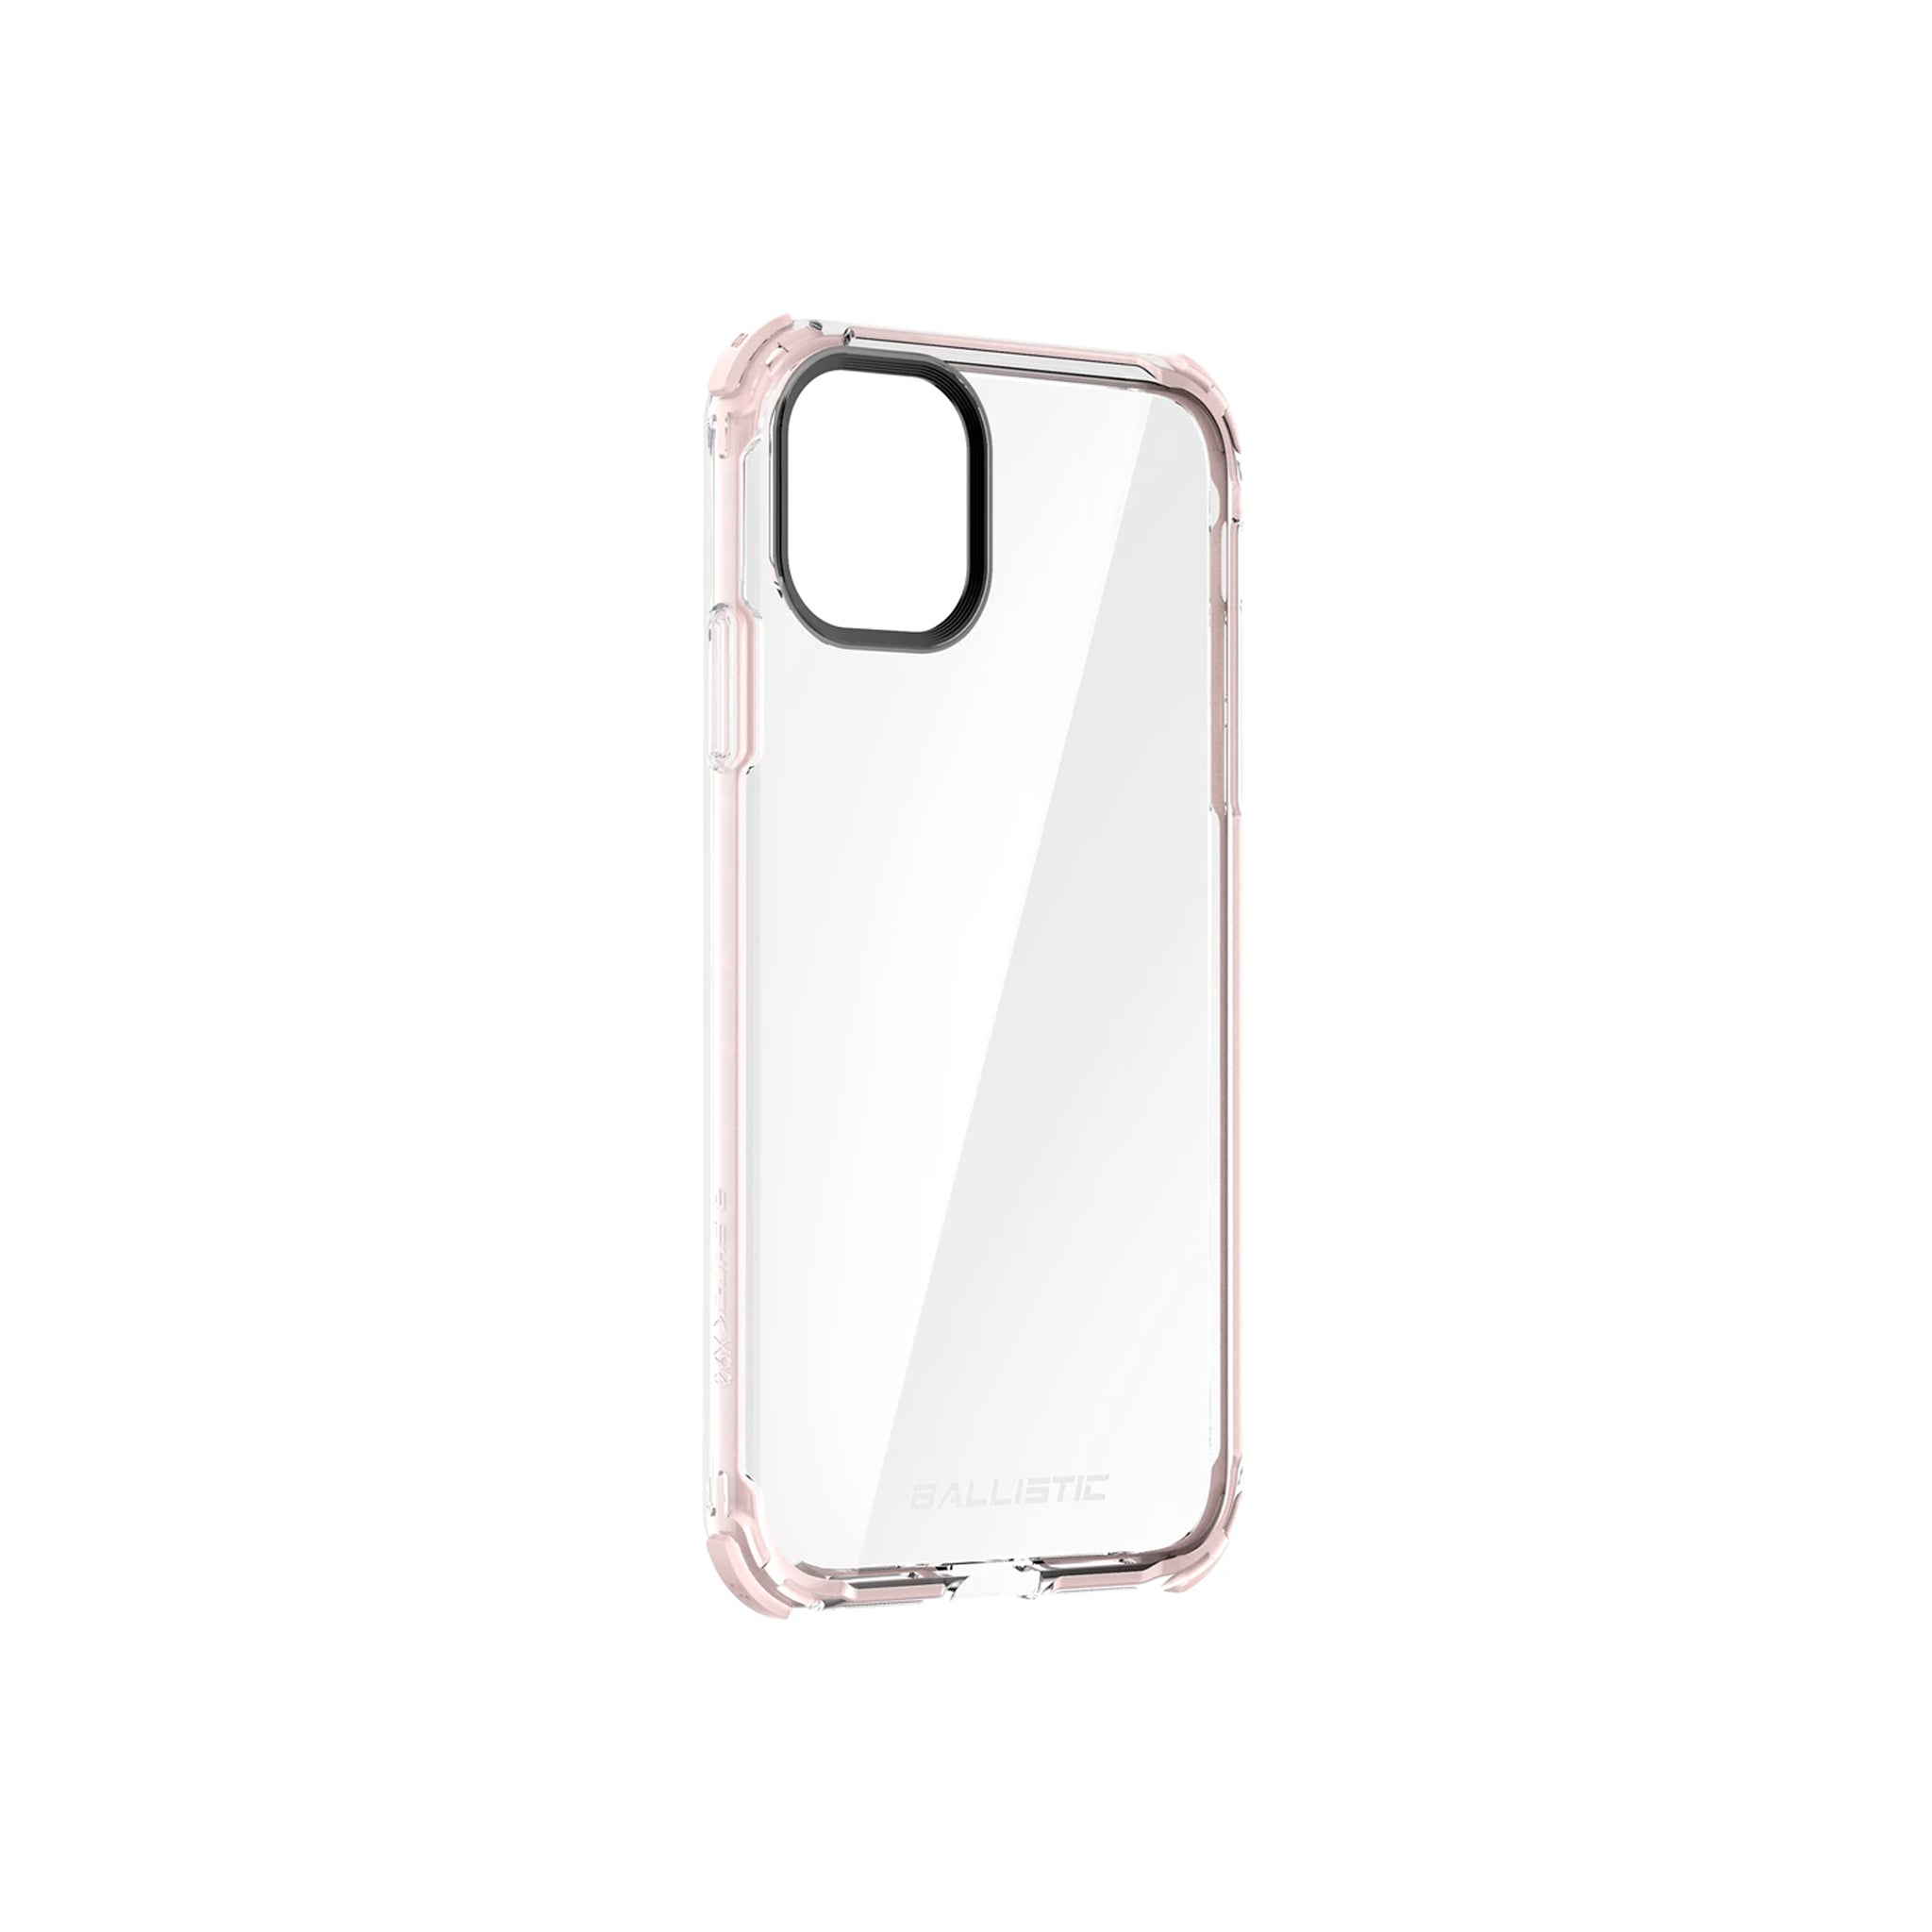 Ballistic - Bshock X90 Series For iPhone 11 Pro  Max - Pink